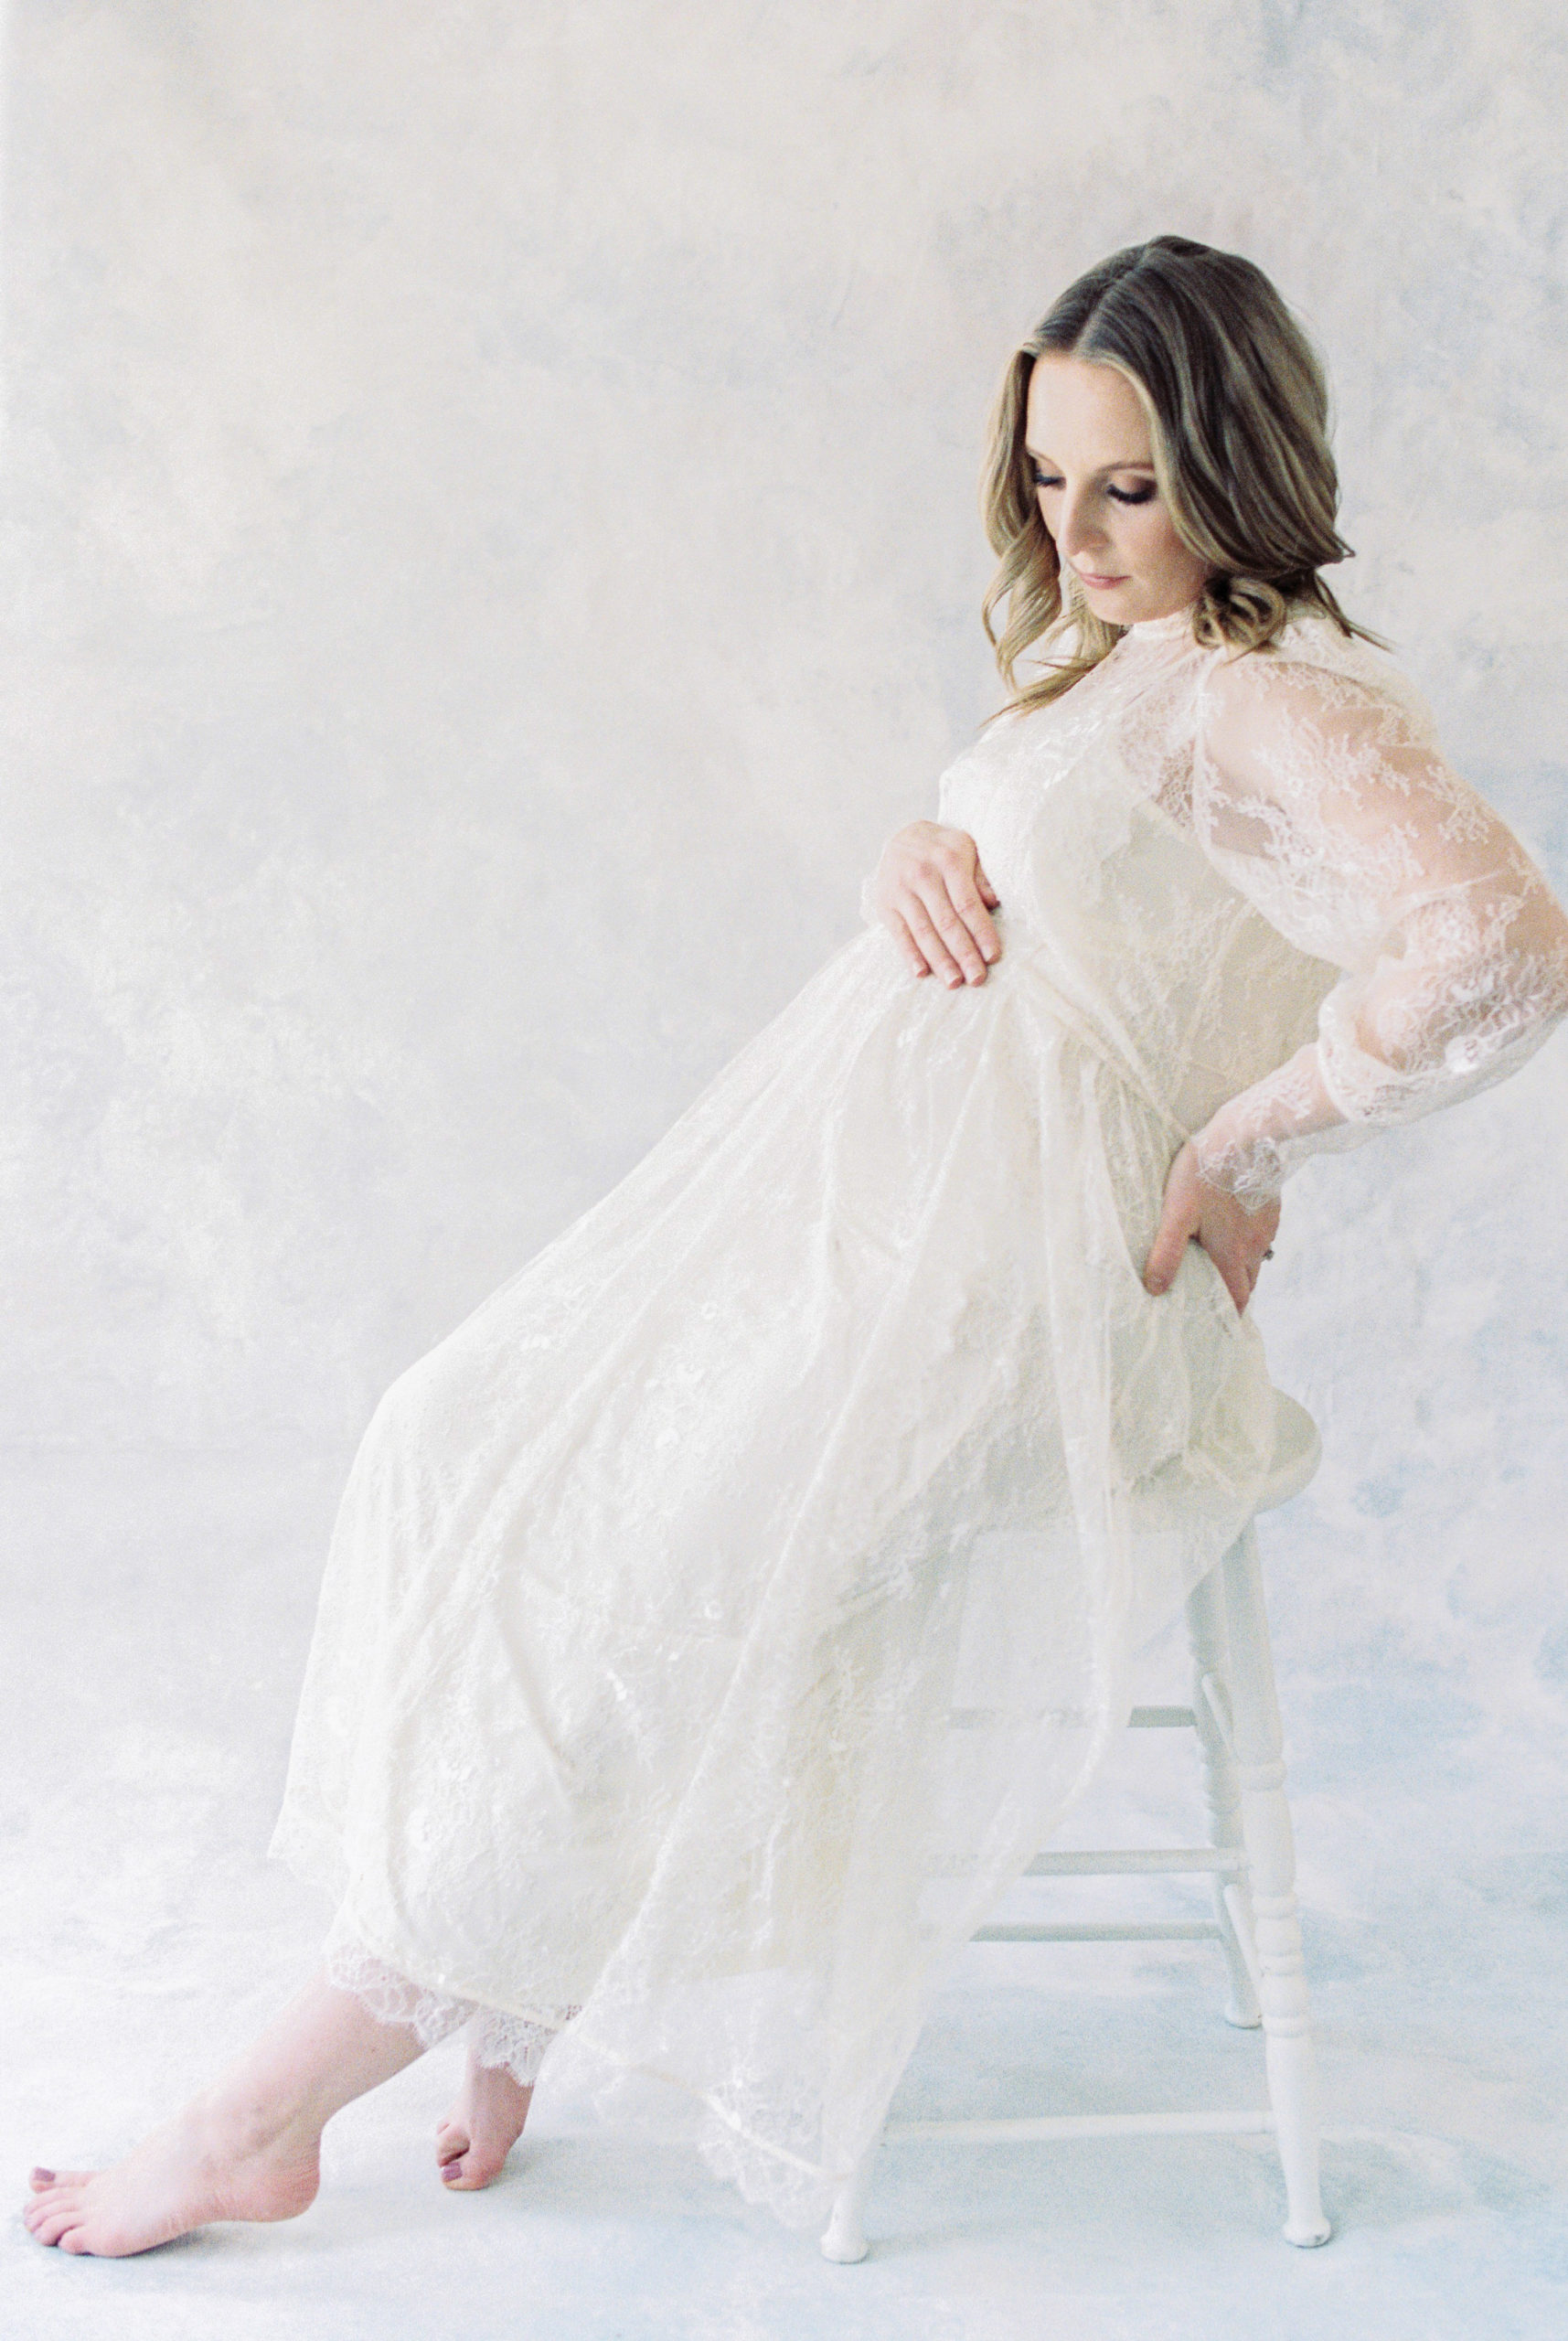 Film photo of expectant mother in white. Edmonton maternity photography